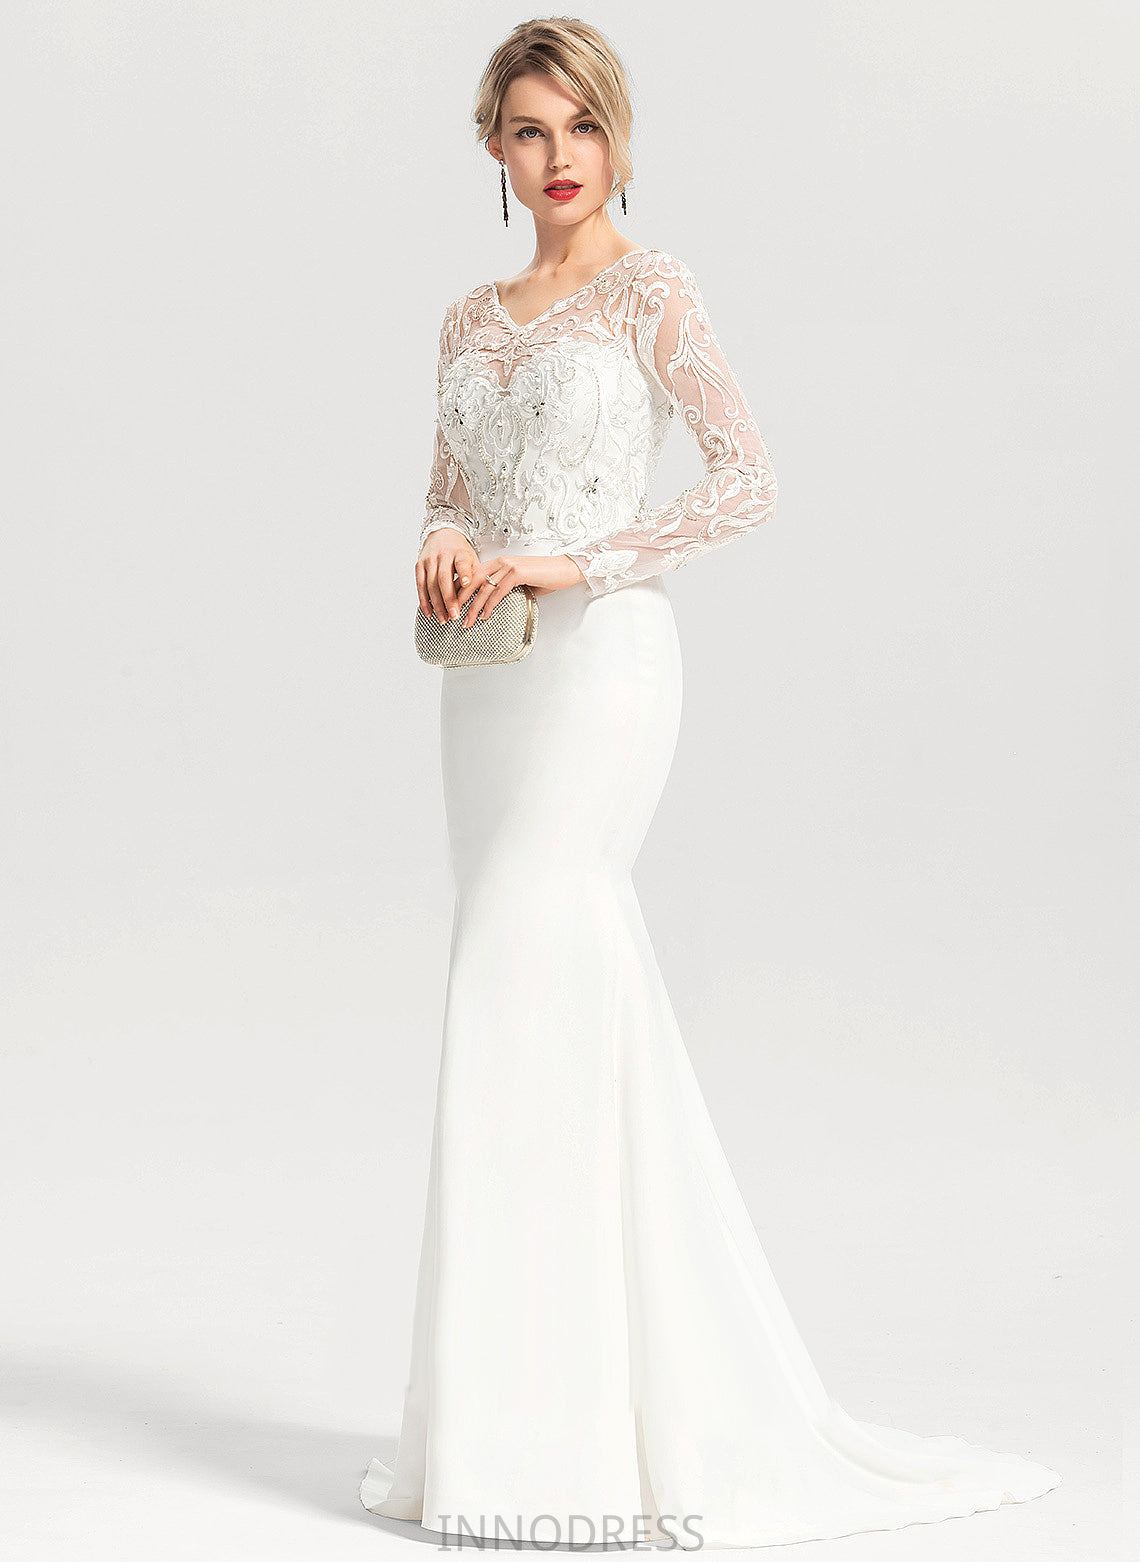 Gertrude Stretch Sequins Dress Wedding Dresses Sweep With Trumpet/Mermaid Beading V-neck Lace Wedding Crepe Train